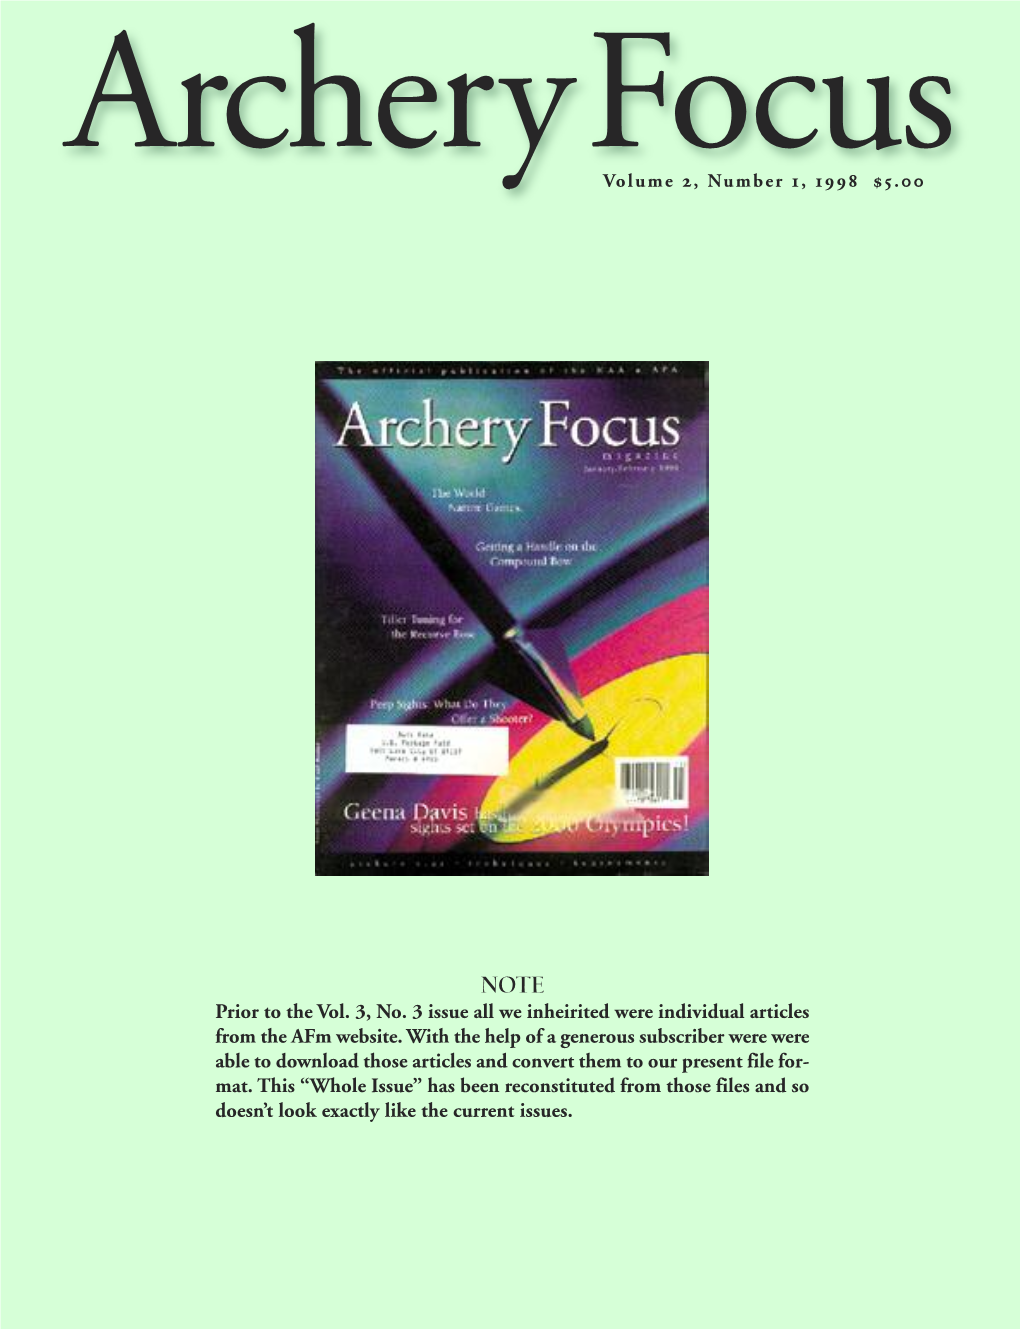 Prior to the Vol. 3, No. 3 Issue All We Inheirited Were Individual Articles from the Afm Website